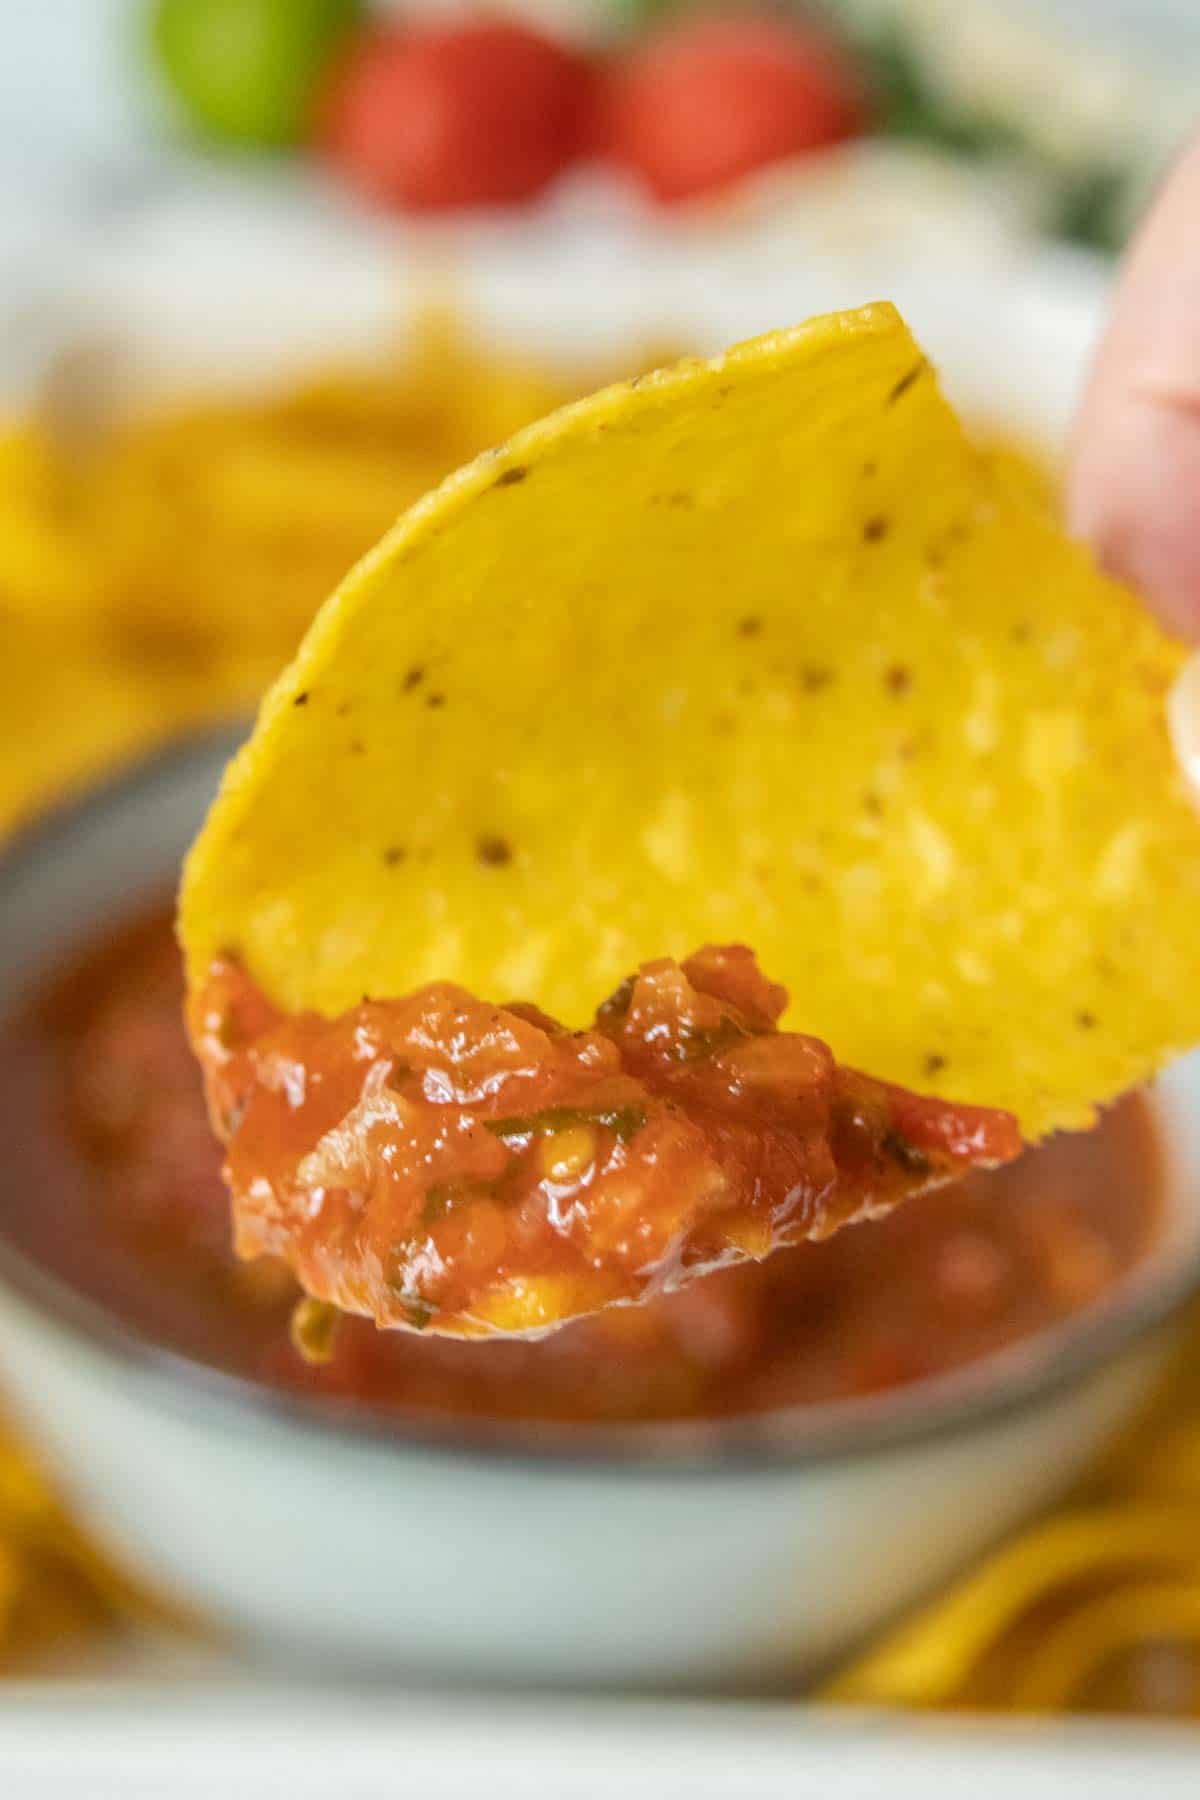 A person is dipping a tortilla into a bowl of salsa.